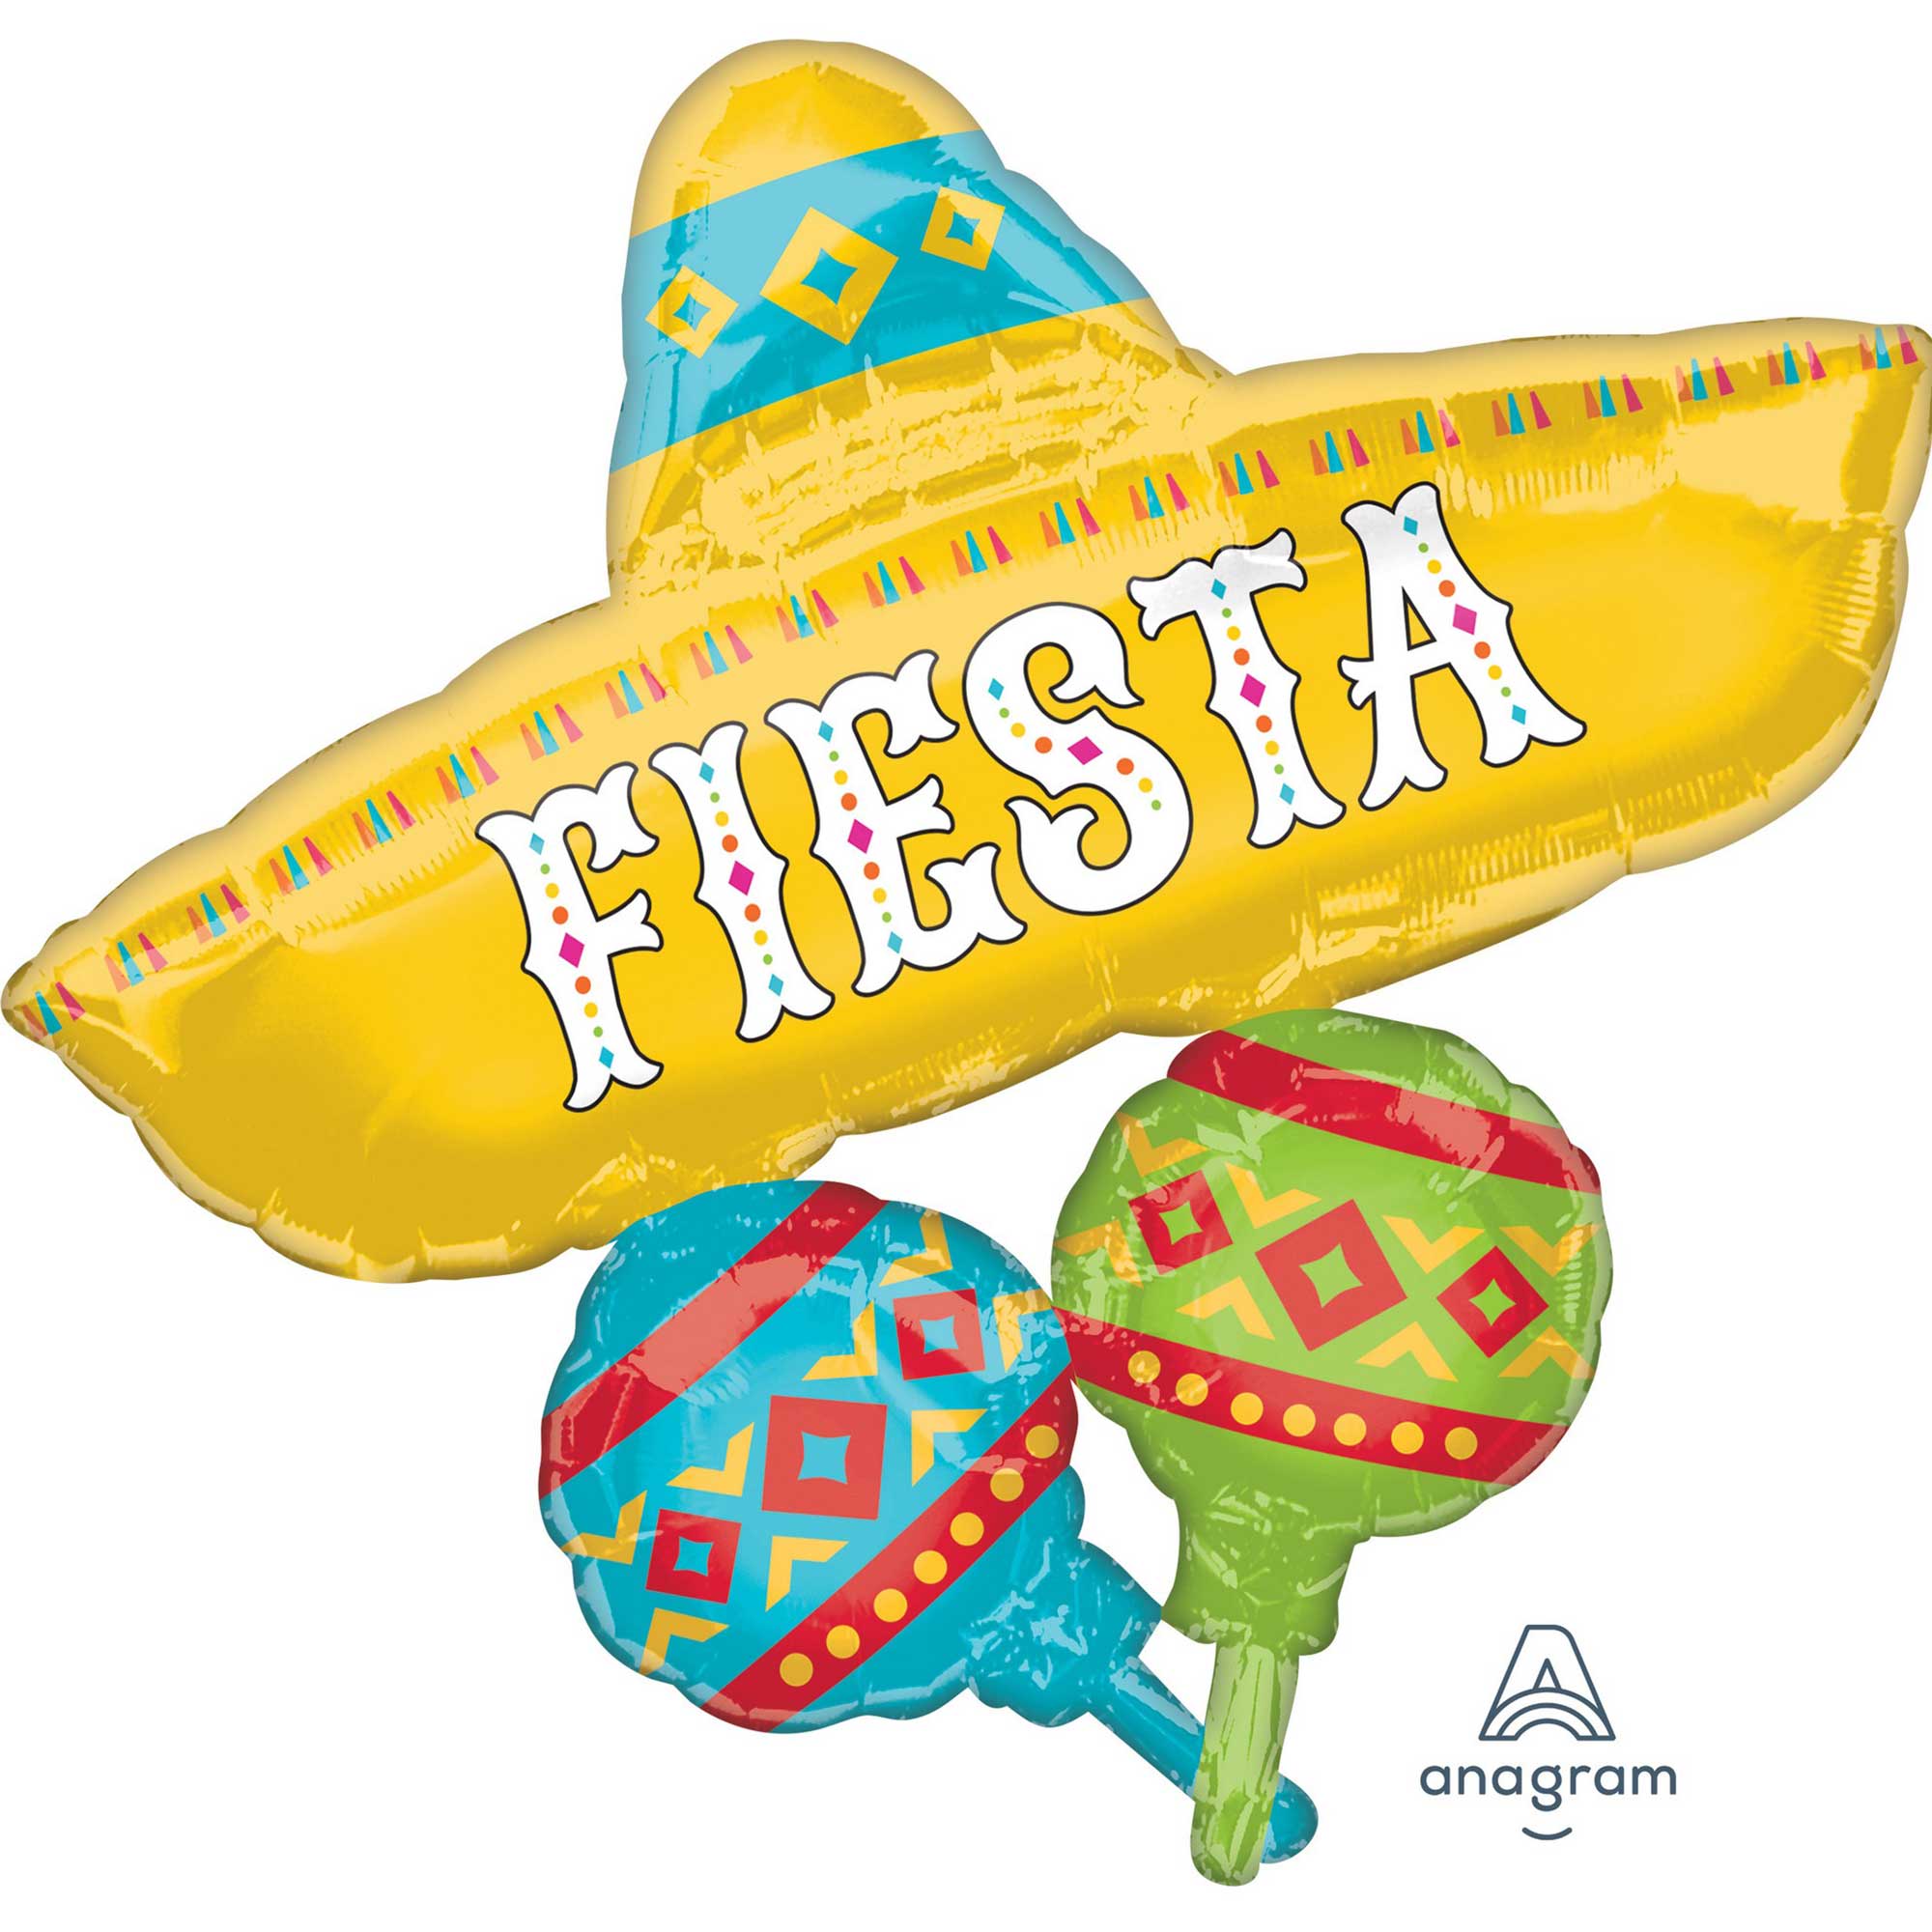 Get ready to salsa into a world of colour and excitement with Party Empress' Fiesta Balloons! Perfect for adding a festive touch to your fiestas, Cinco de Mayo celebrations, or any event where you want to infuse energy and vibrant hues.